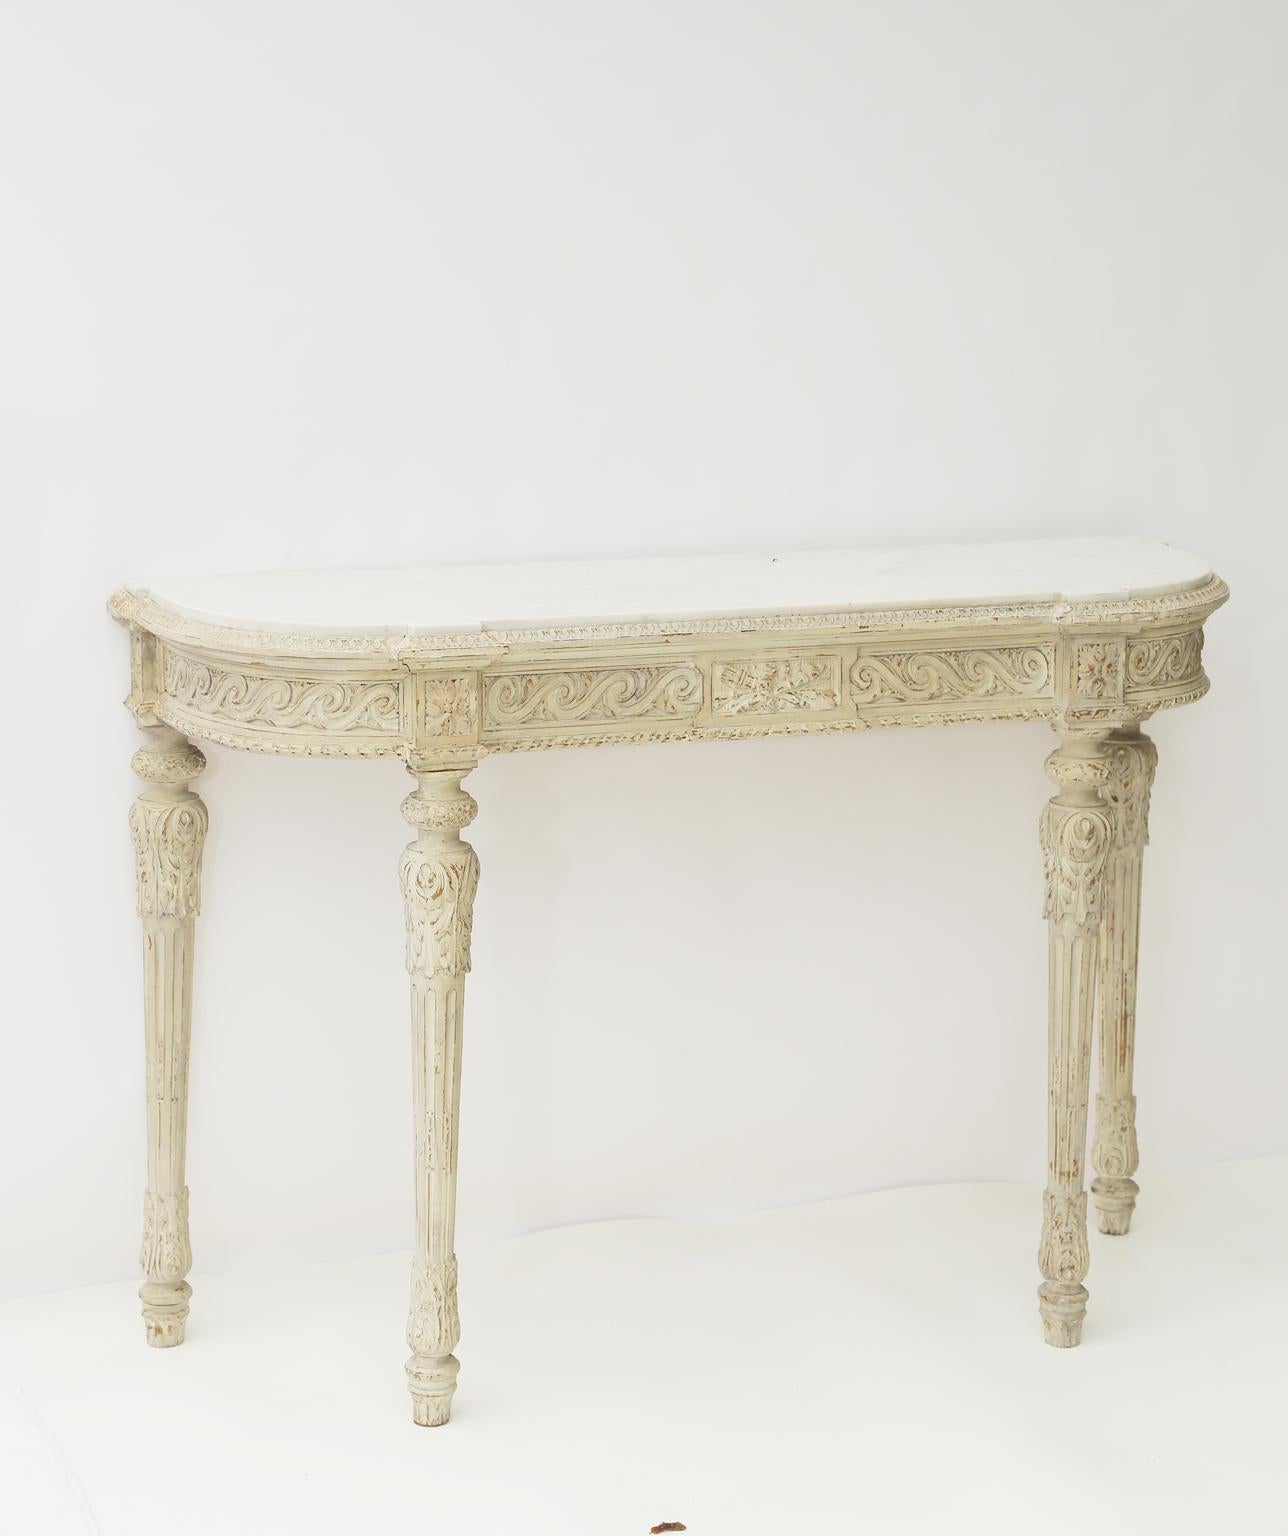 Console table, having a D-shaped top of Carrara marble, on a painted, conforming base, showing natural wear, with gadrooned border, its apron carved with evolute scrollwork, raised on round, tapering, stop-fluted legs, headed by foliate caps, ending